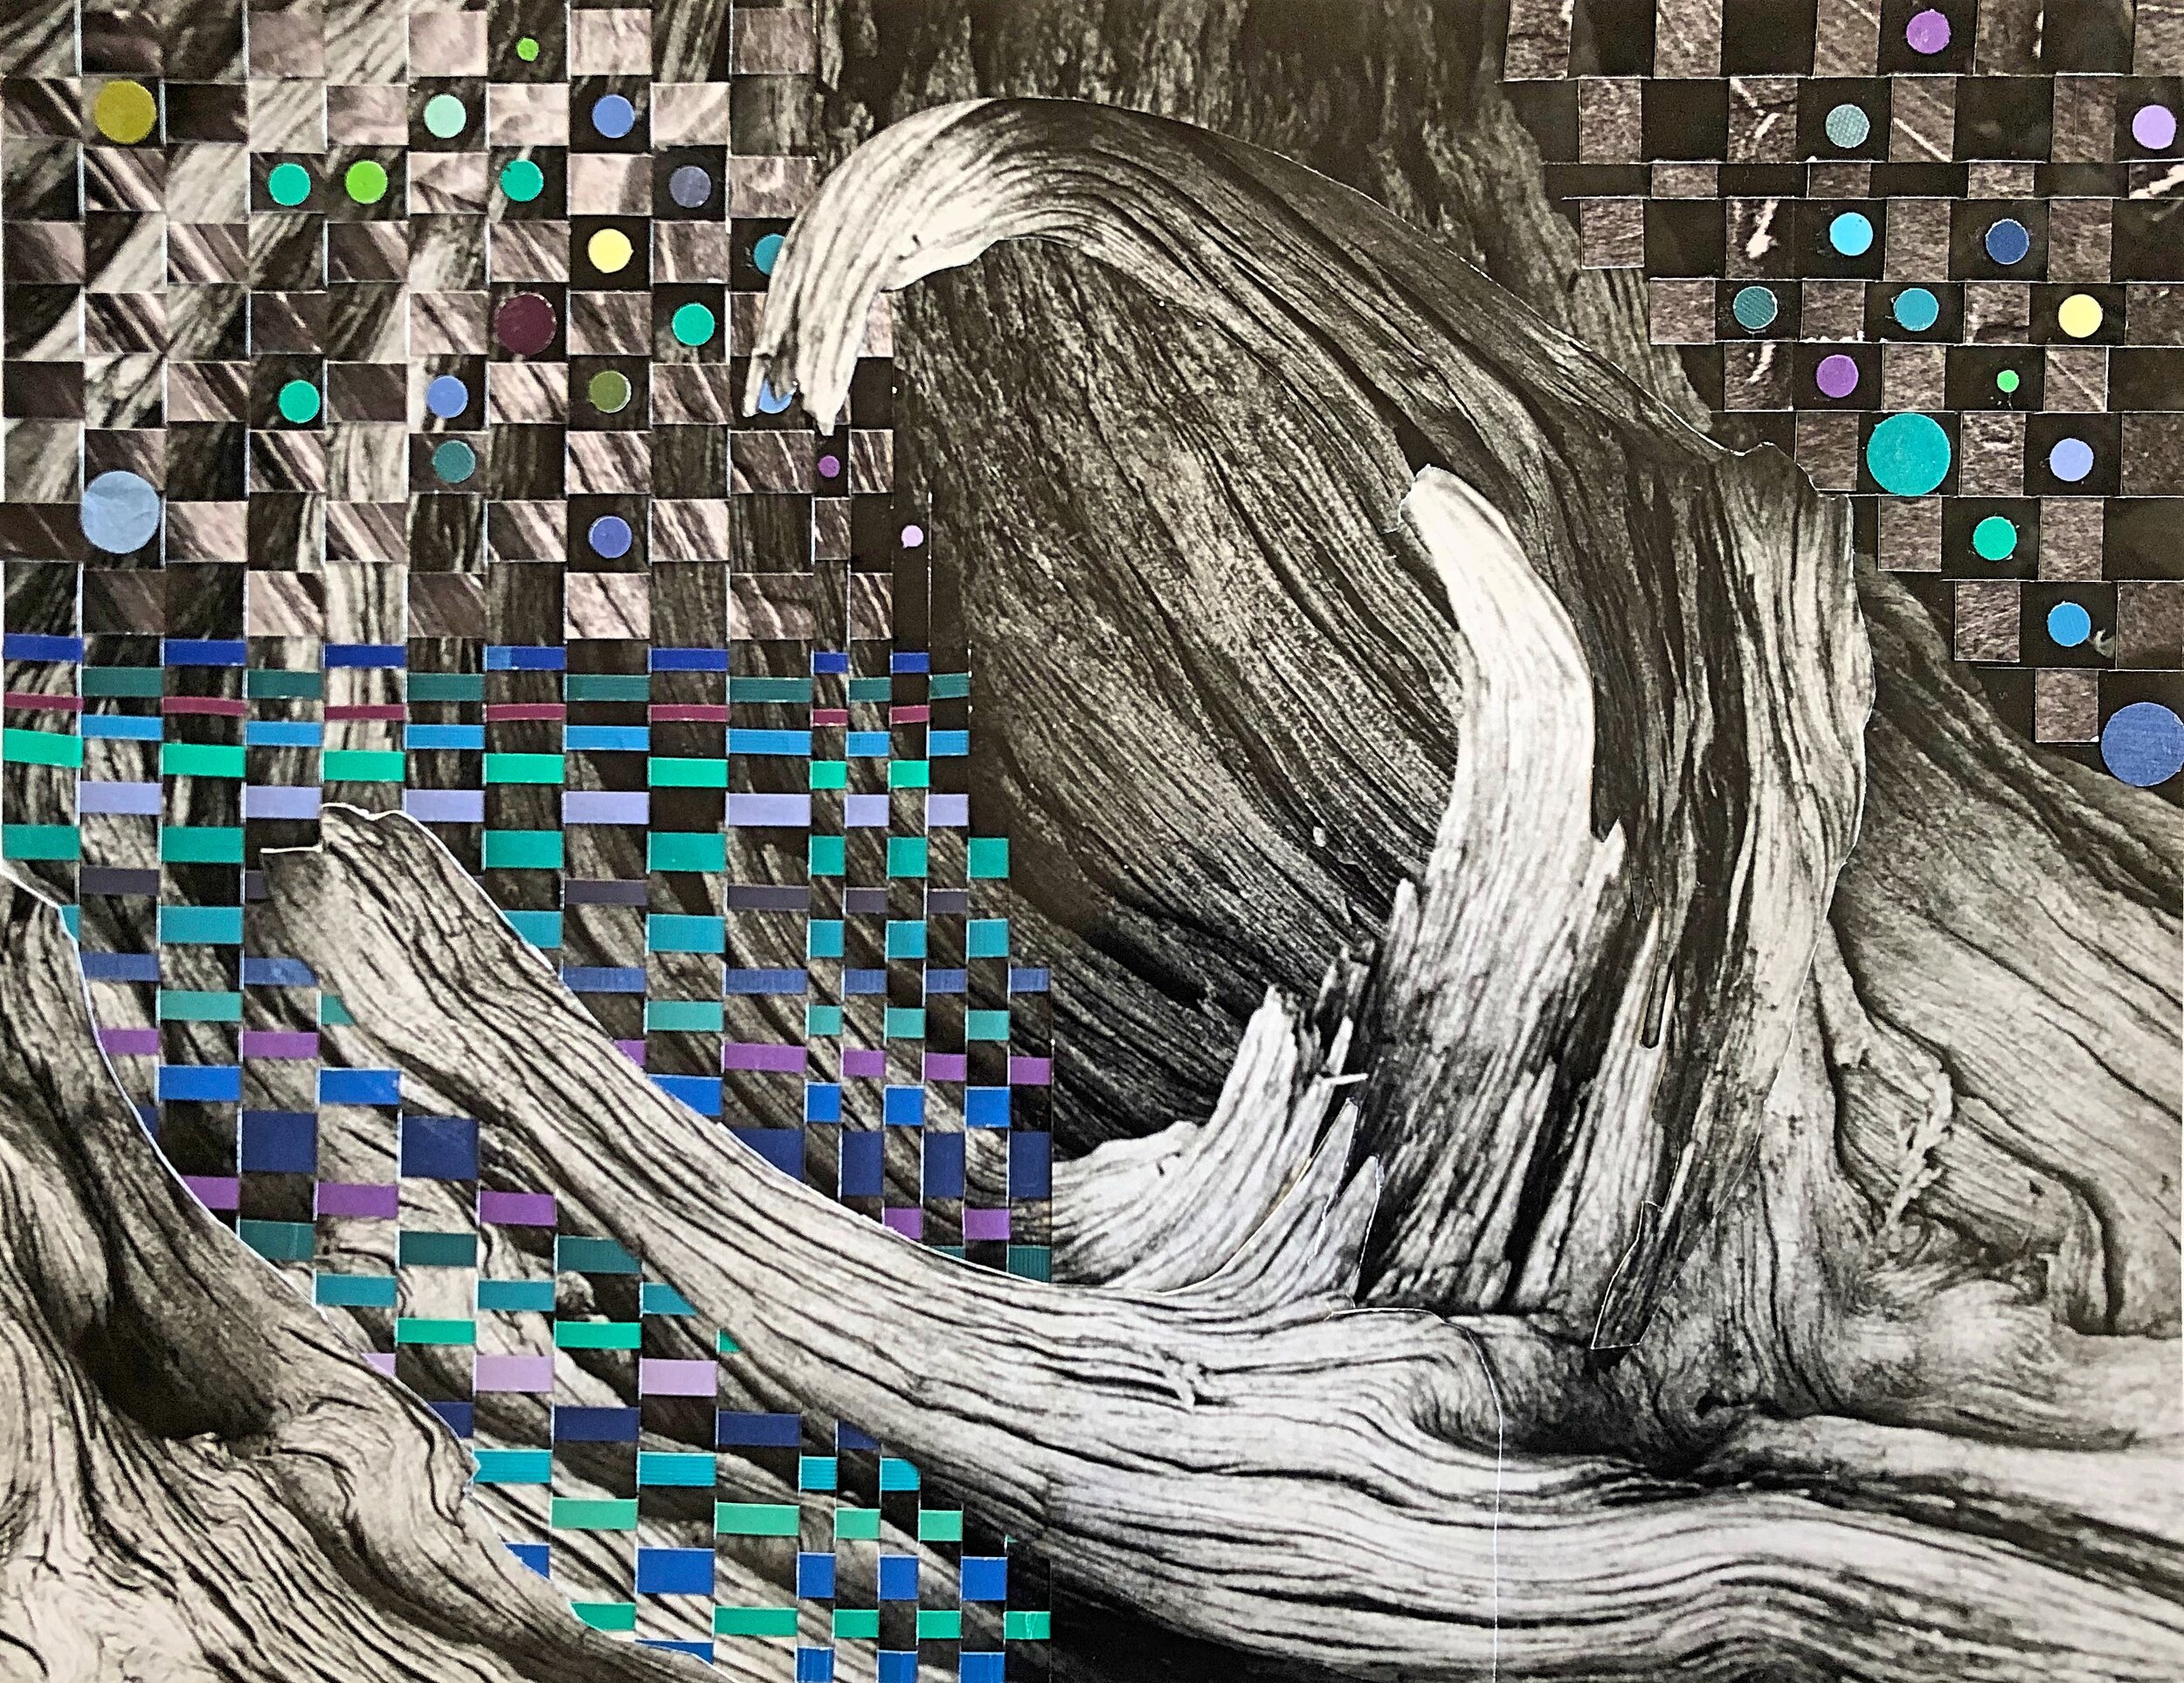 Stump Weave, 2020 (10 x 13 inches) $85 paper, unframed